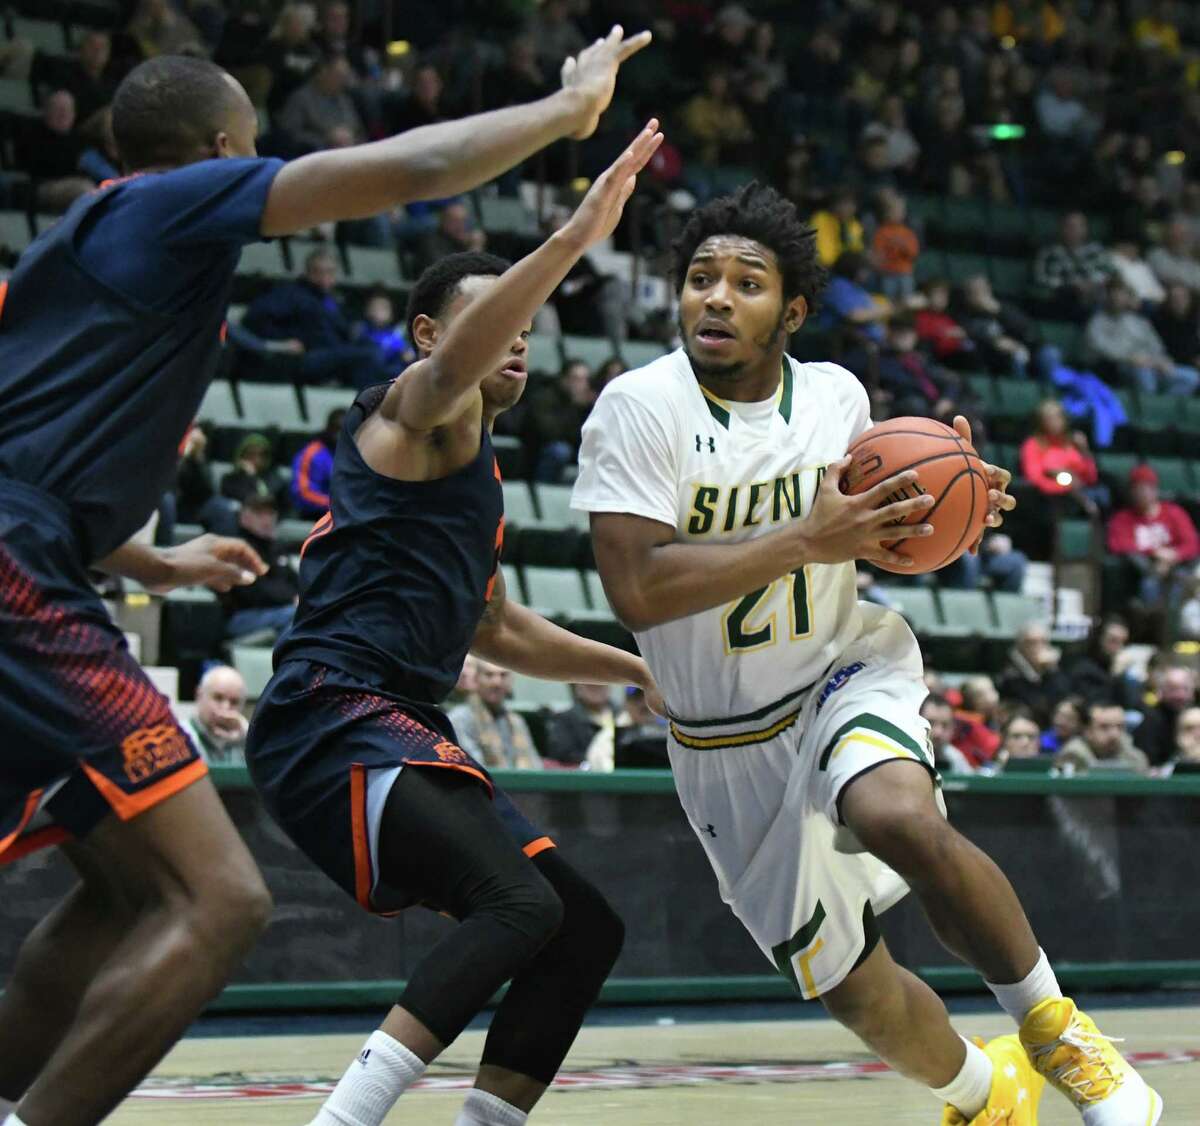 By any name, Shivers contributing for Siena basketball